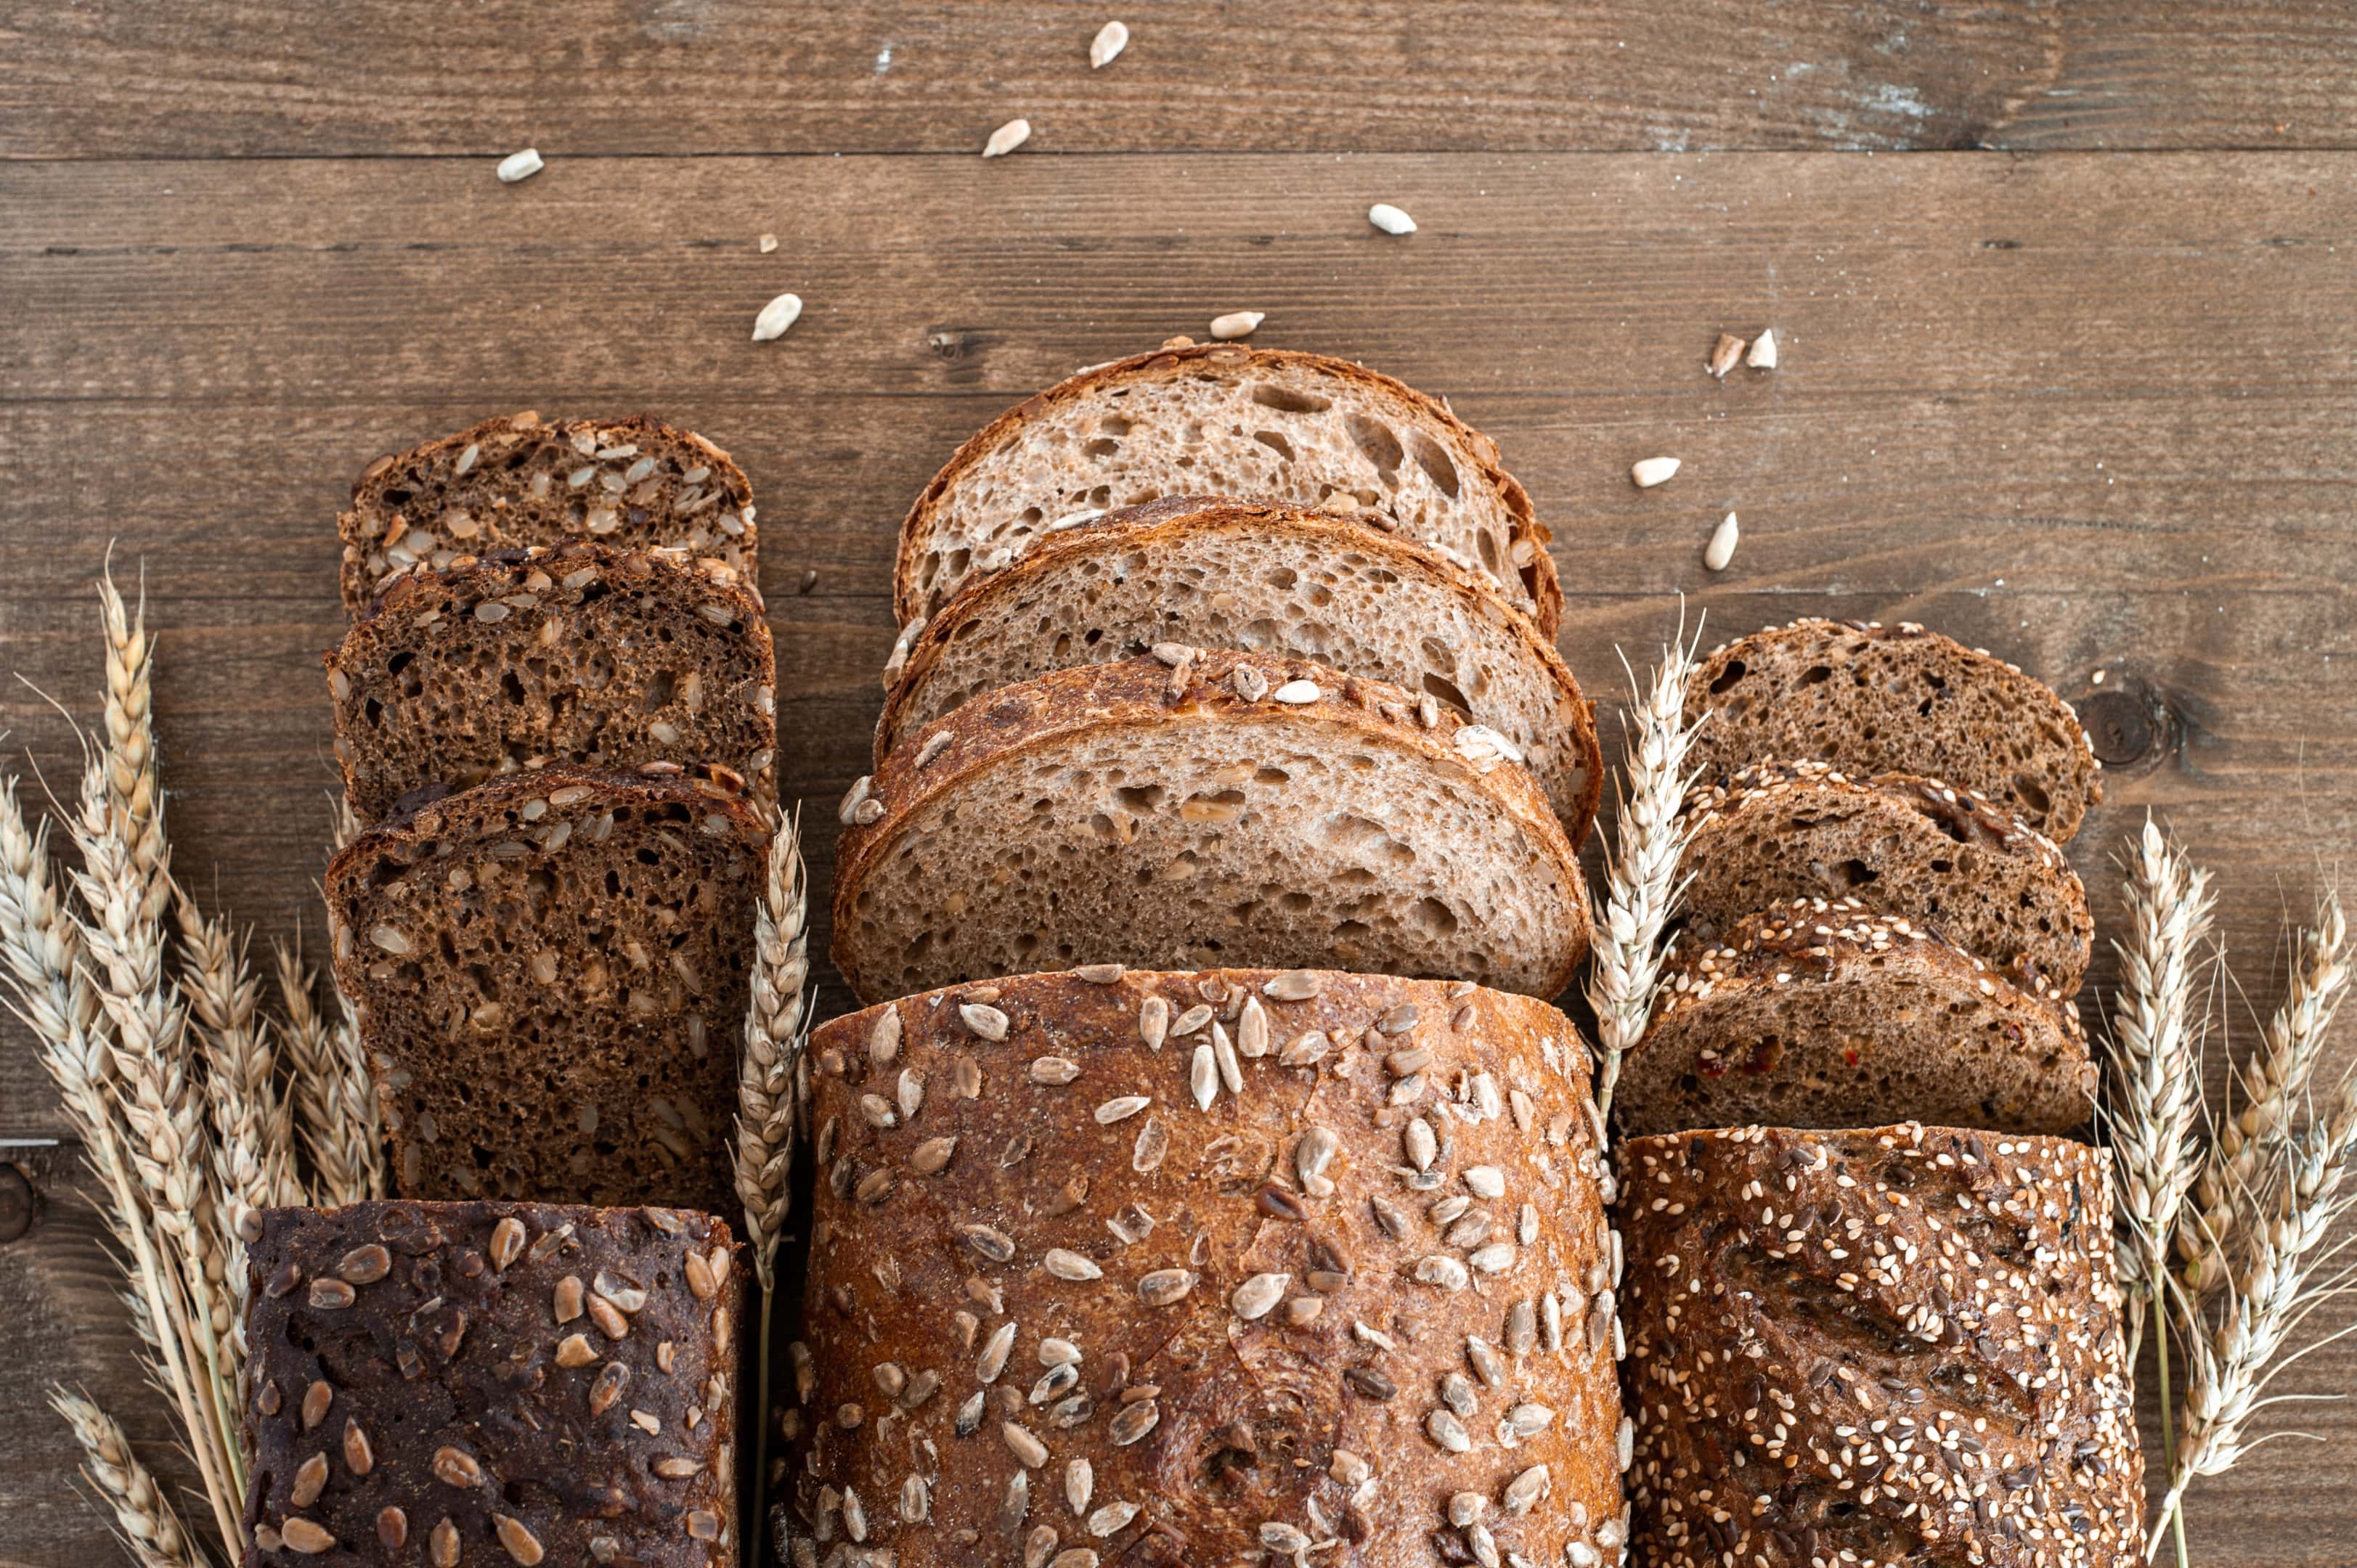 Different Loaves of Whole Grain Bread Are Cut Into Pieces